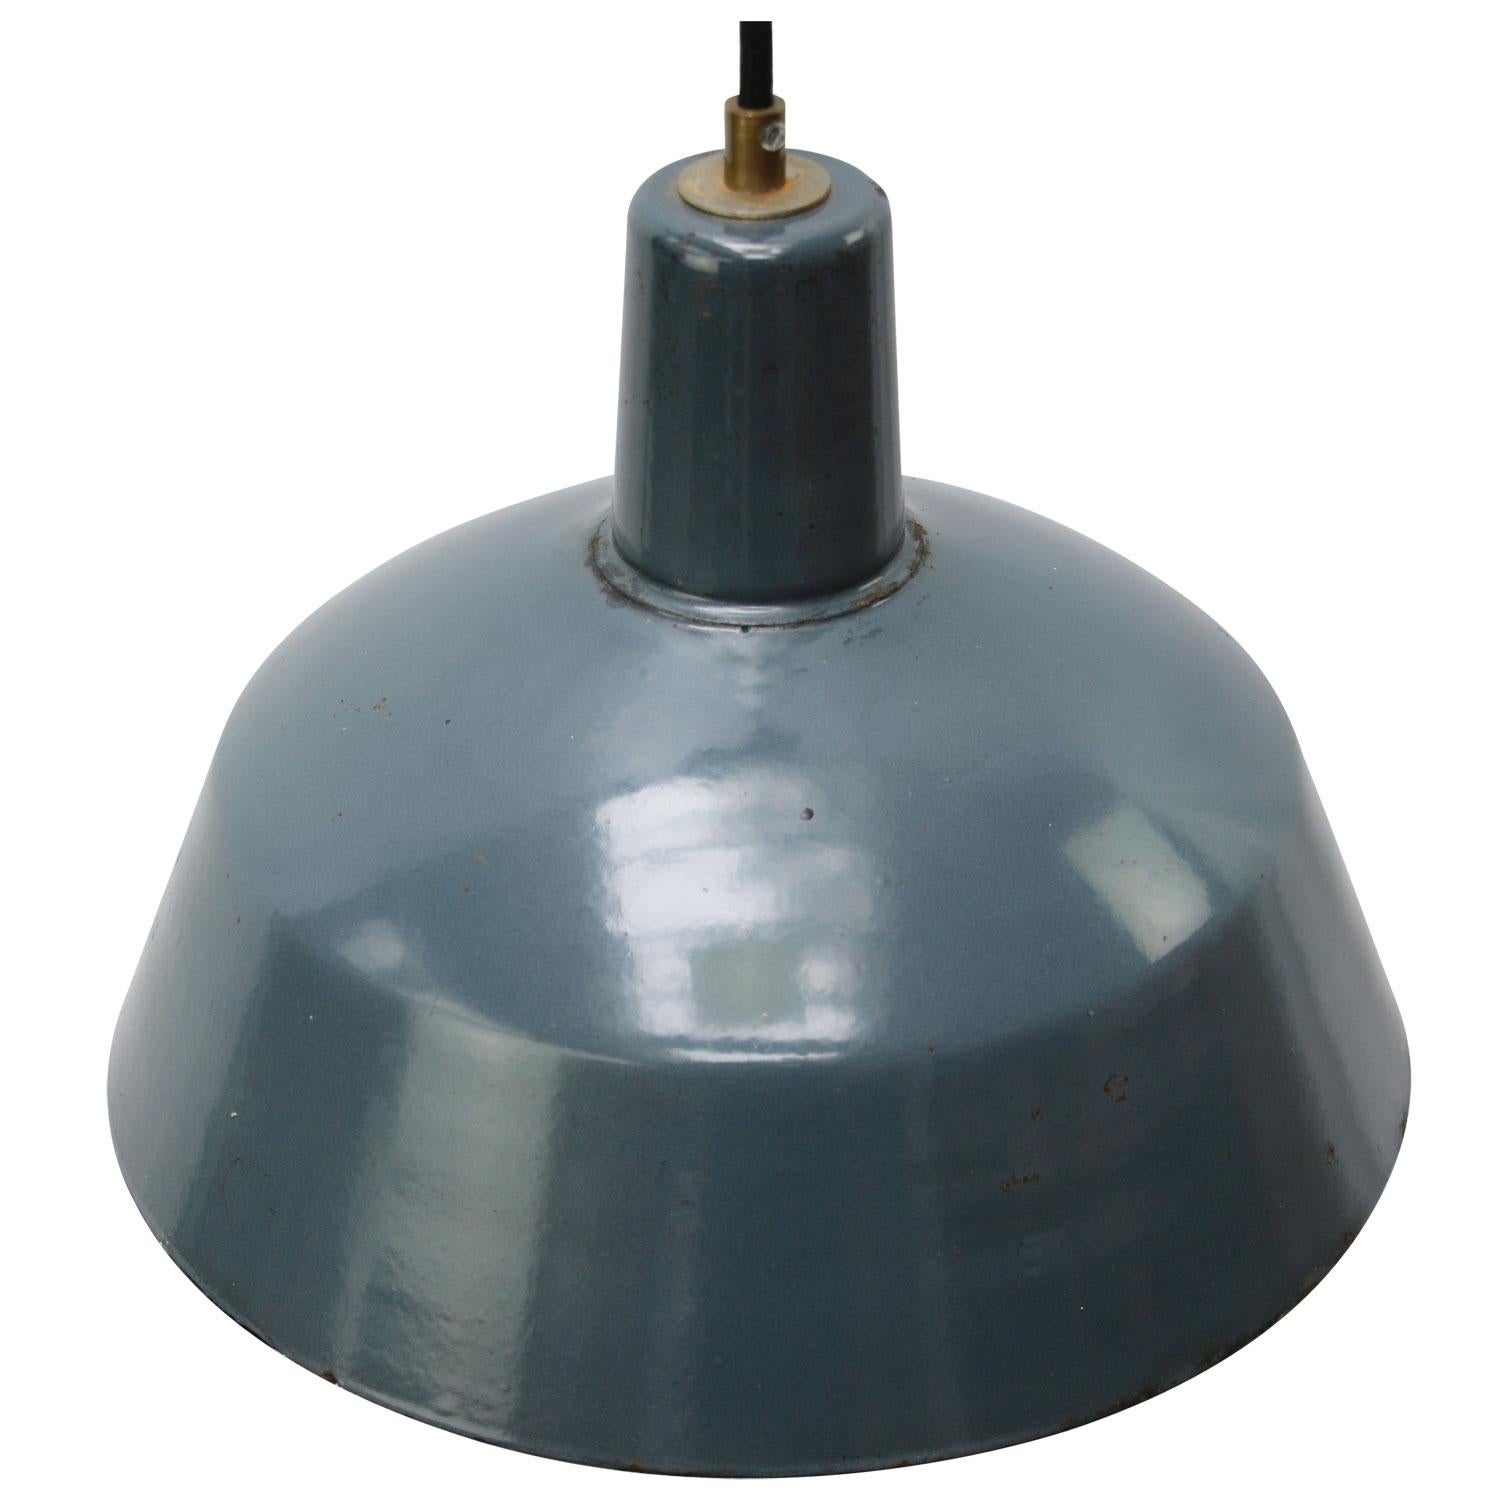 Factory hanging light
Blue enamel, black type, white interior

Weight: 1.20 kg / 2.6 lb

Priced per individual item. All lamps have been made suitable by international standards for incandescent light bulbs, energy-efficient and LED bulbs.